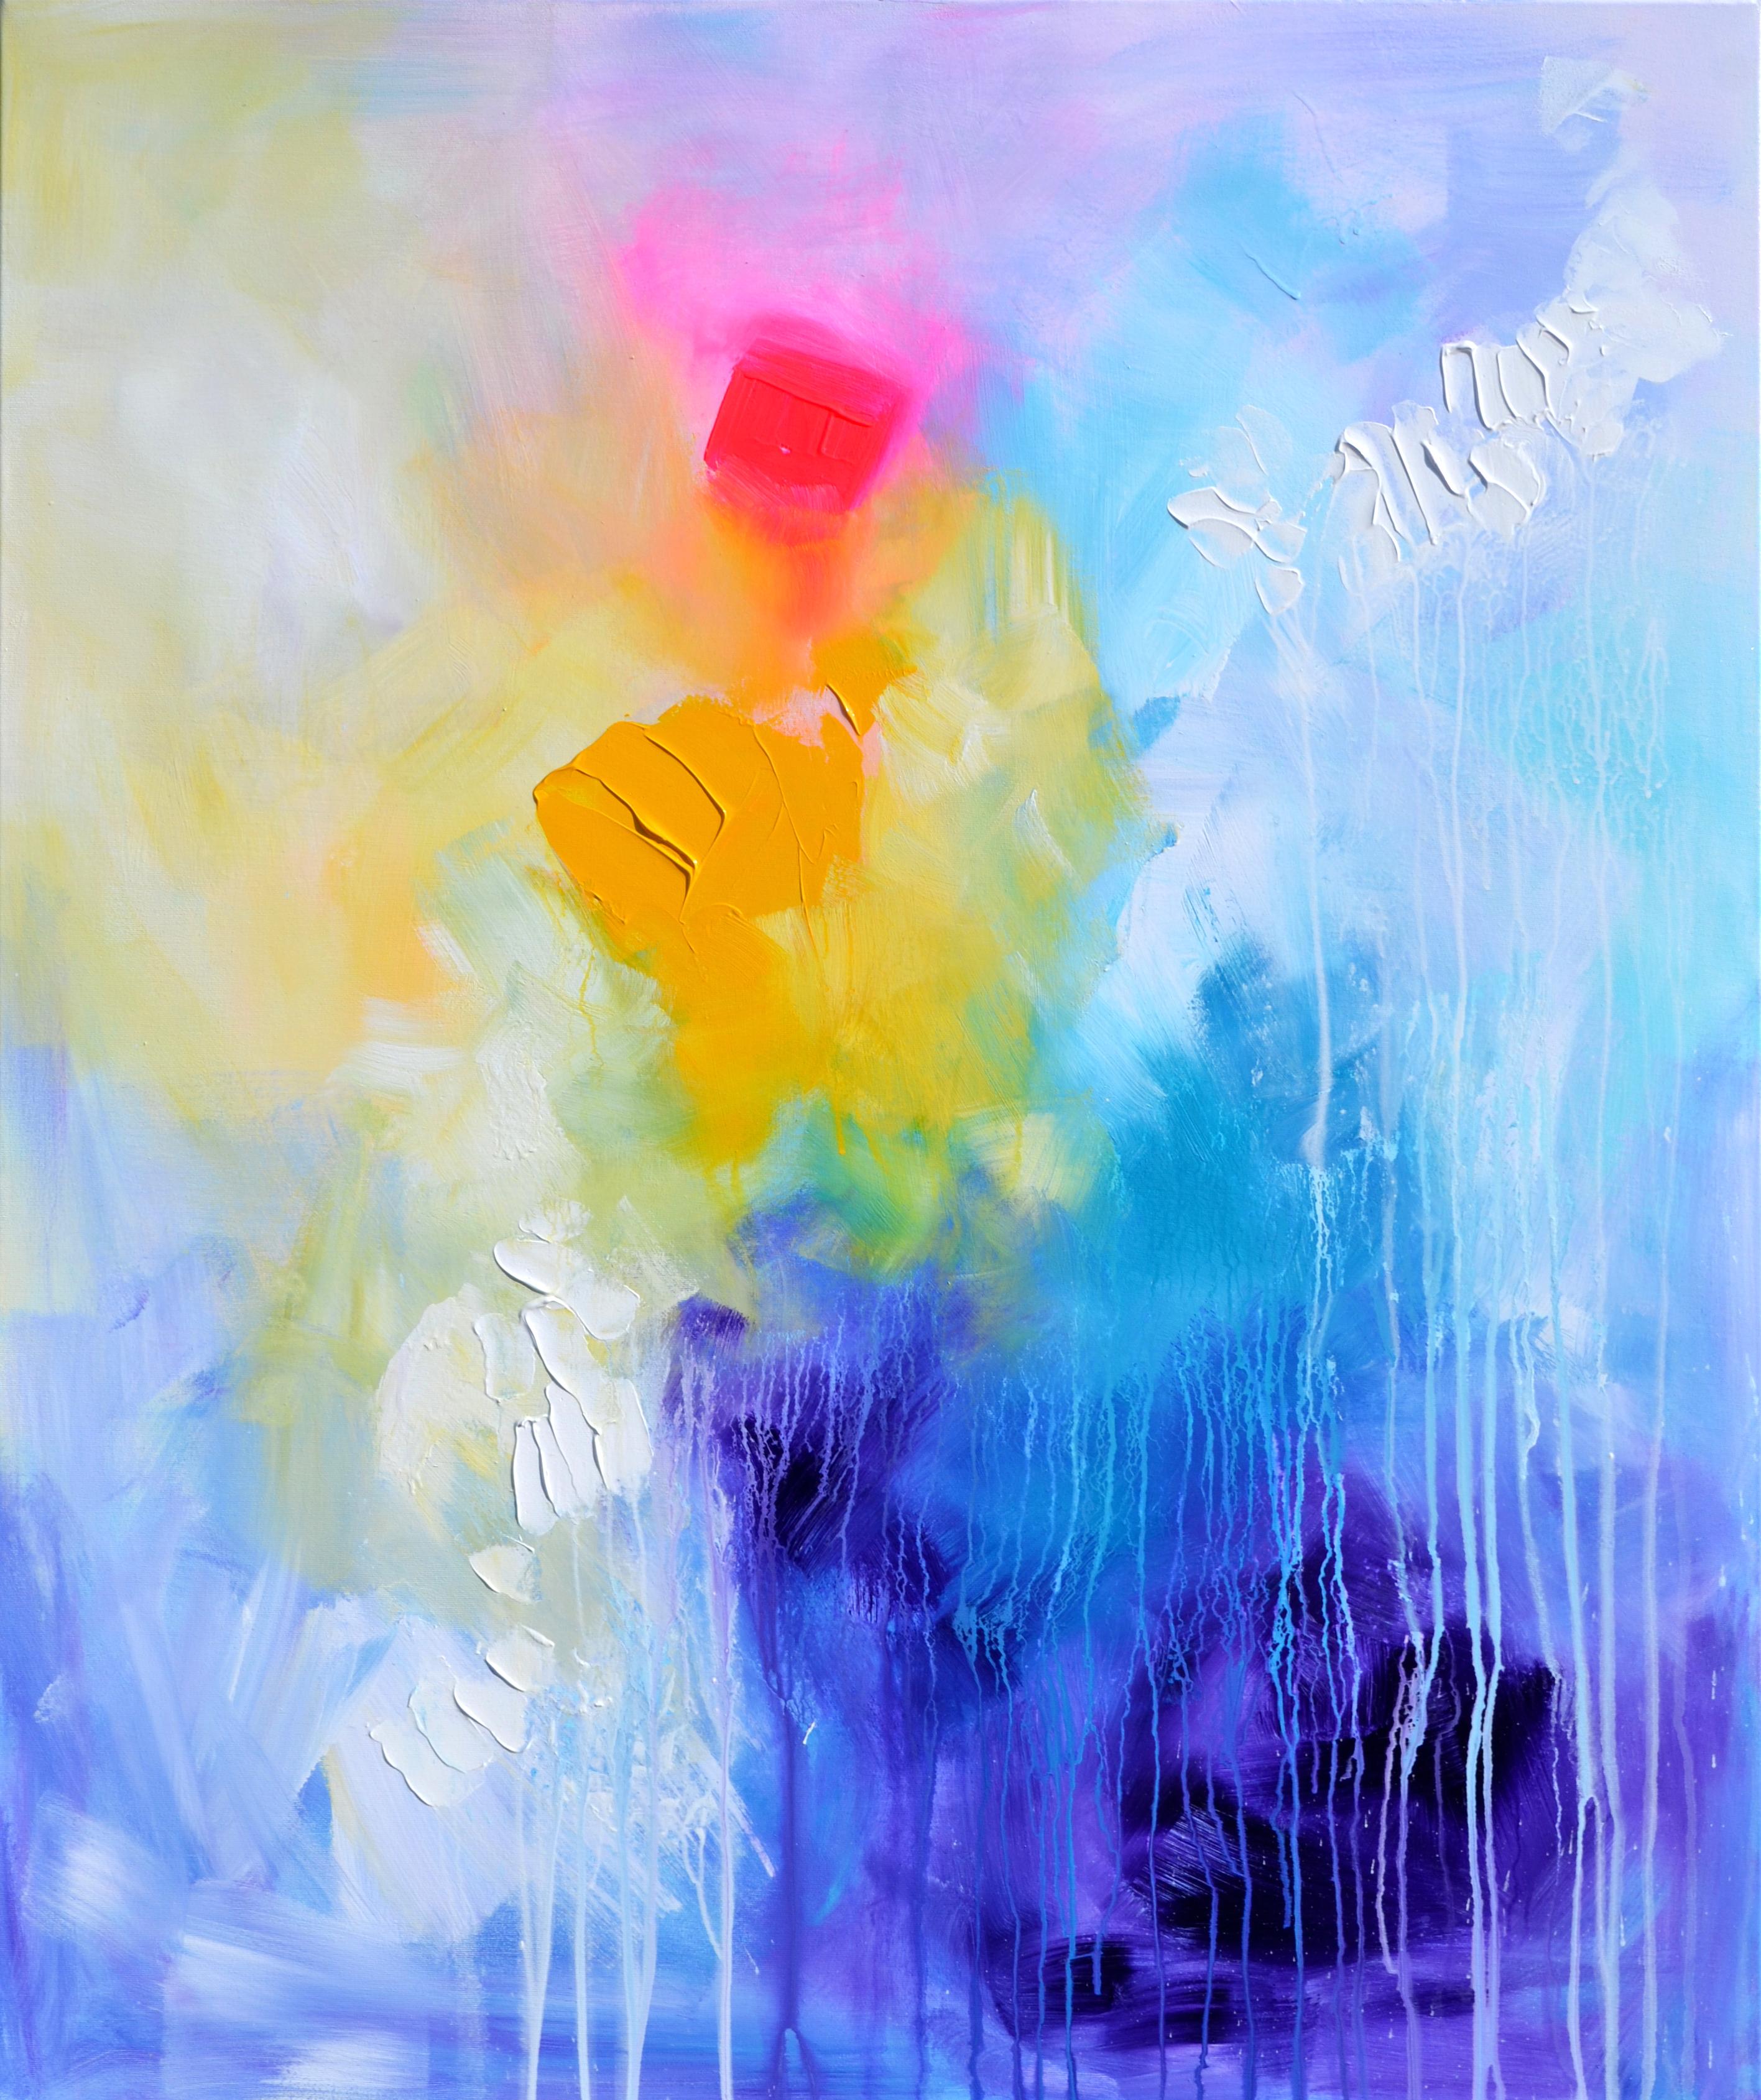 In crafting this piece, I poured my soul into an exuberant celebration of color and monochromy, using the brushes and palette knife's bold strokes to invite a dance of joy and freedom. It's an abstract symphony of vibrant hues, where each swipe and